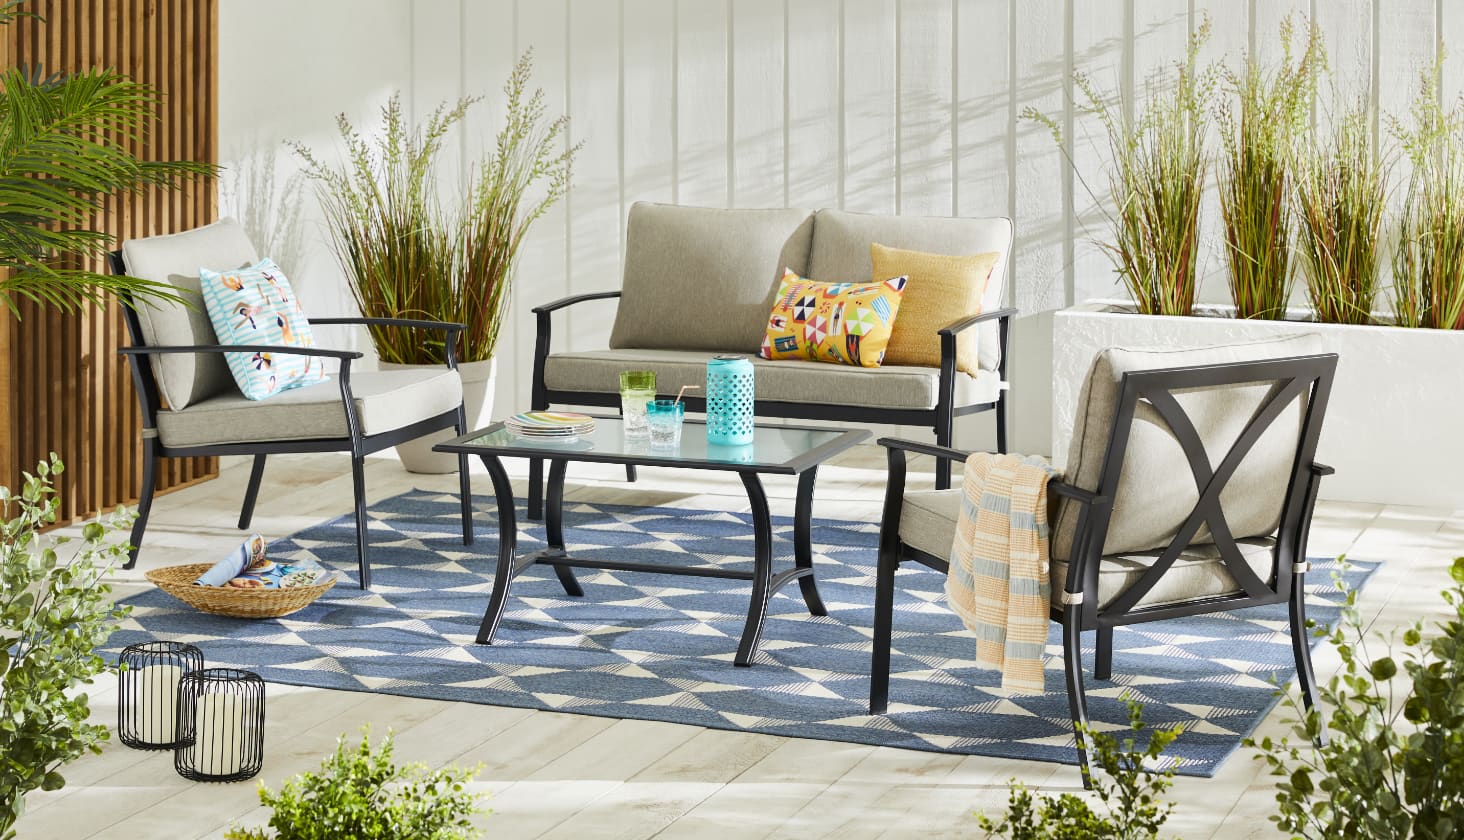 For Living Avenue Conversation Set including a loveseat, armchairs and a coffee table on a patio.